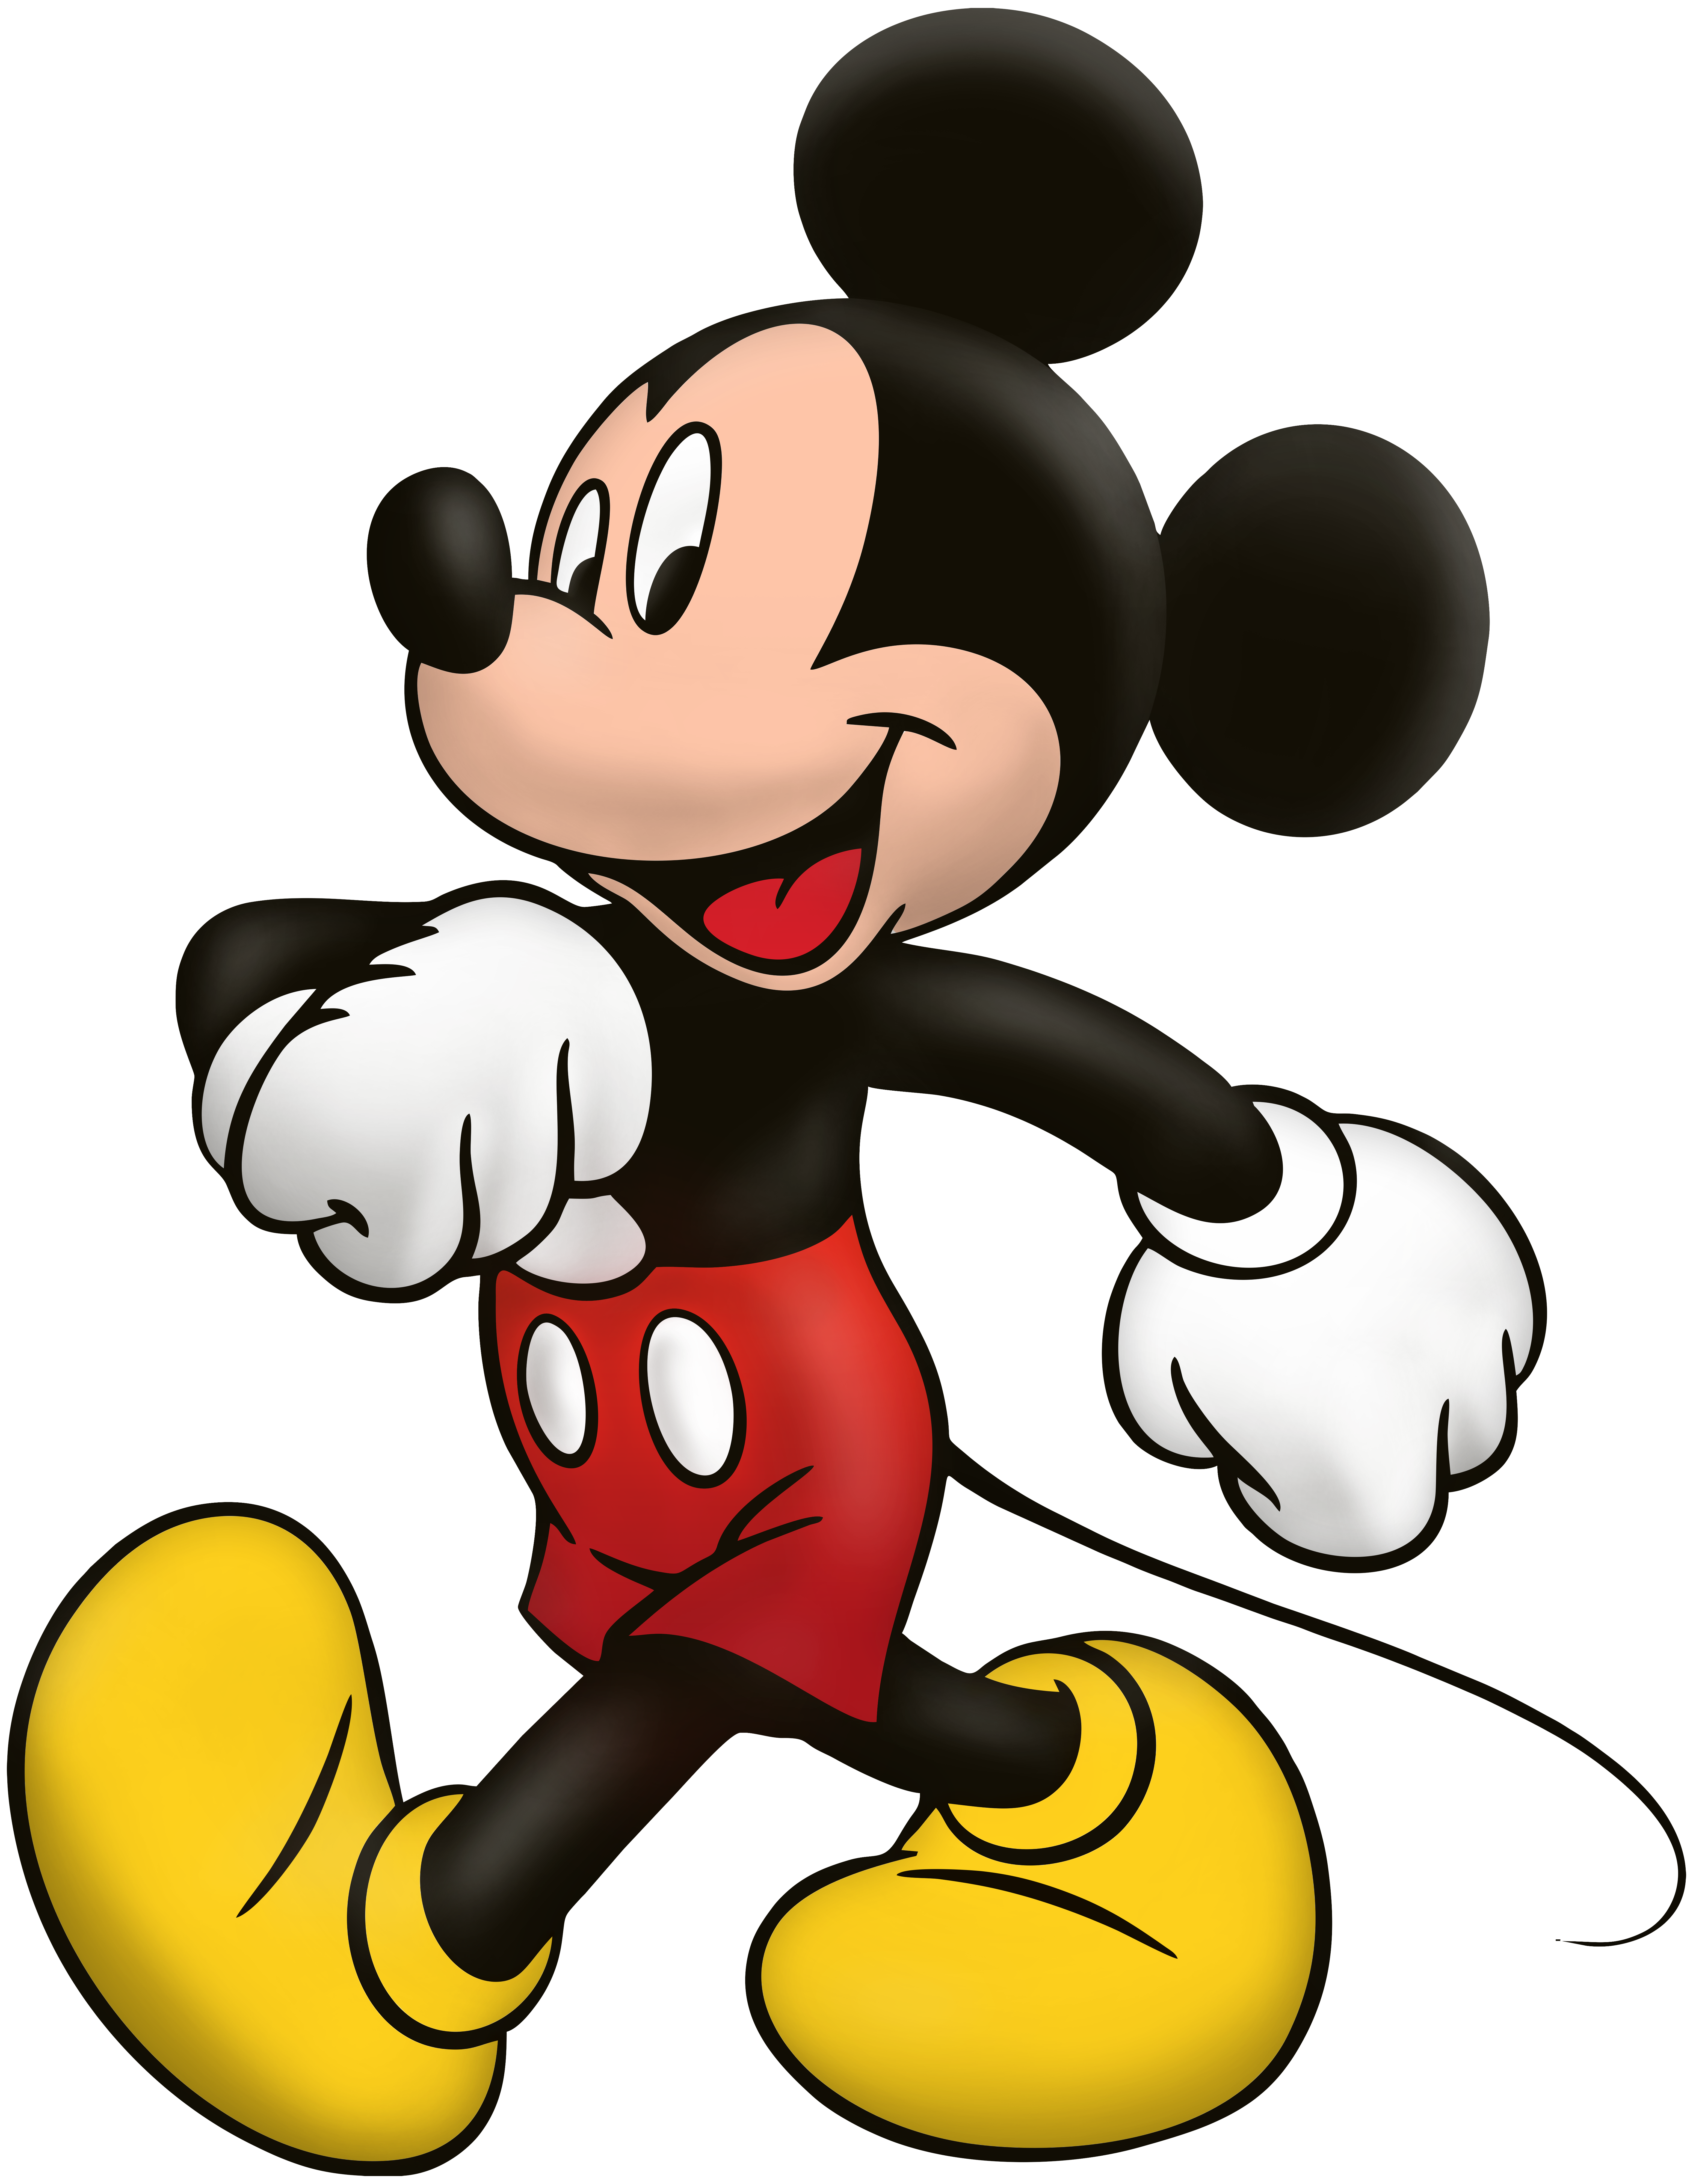 Mickey Mouse PNG Cartoon Image.